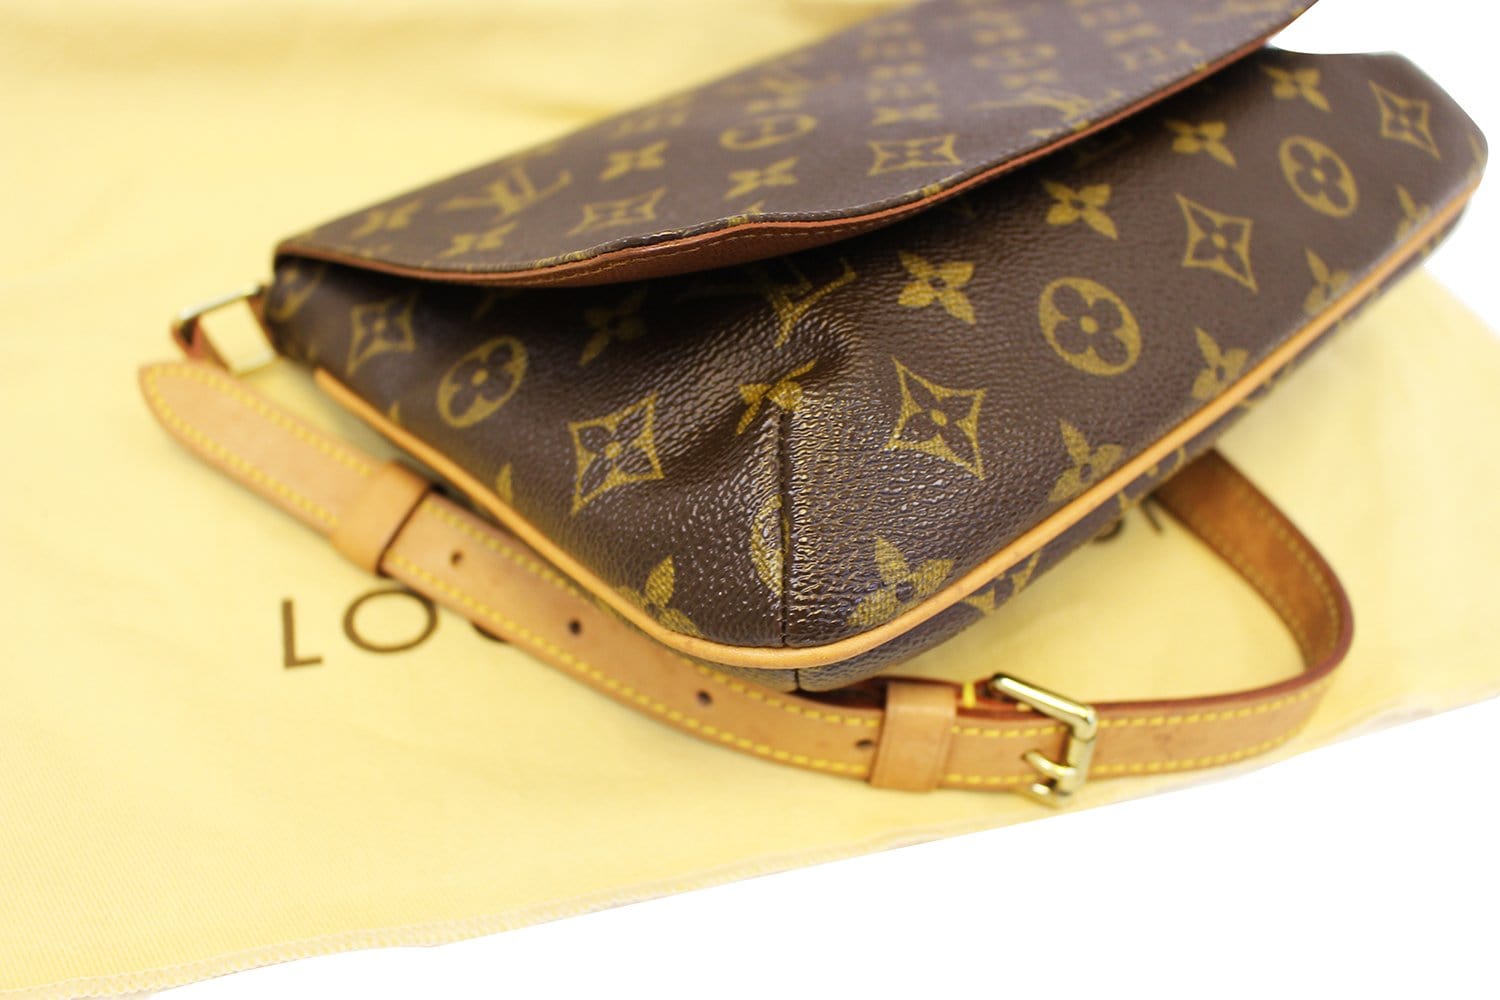 I CUT THE STRAP OFF MY LOUIS VUITTON BAG 😲  Converting my Musette Tango  into a crossbody bag 